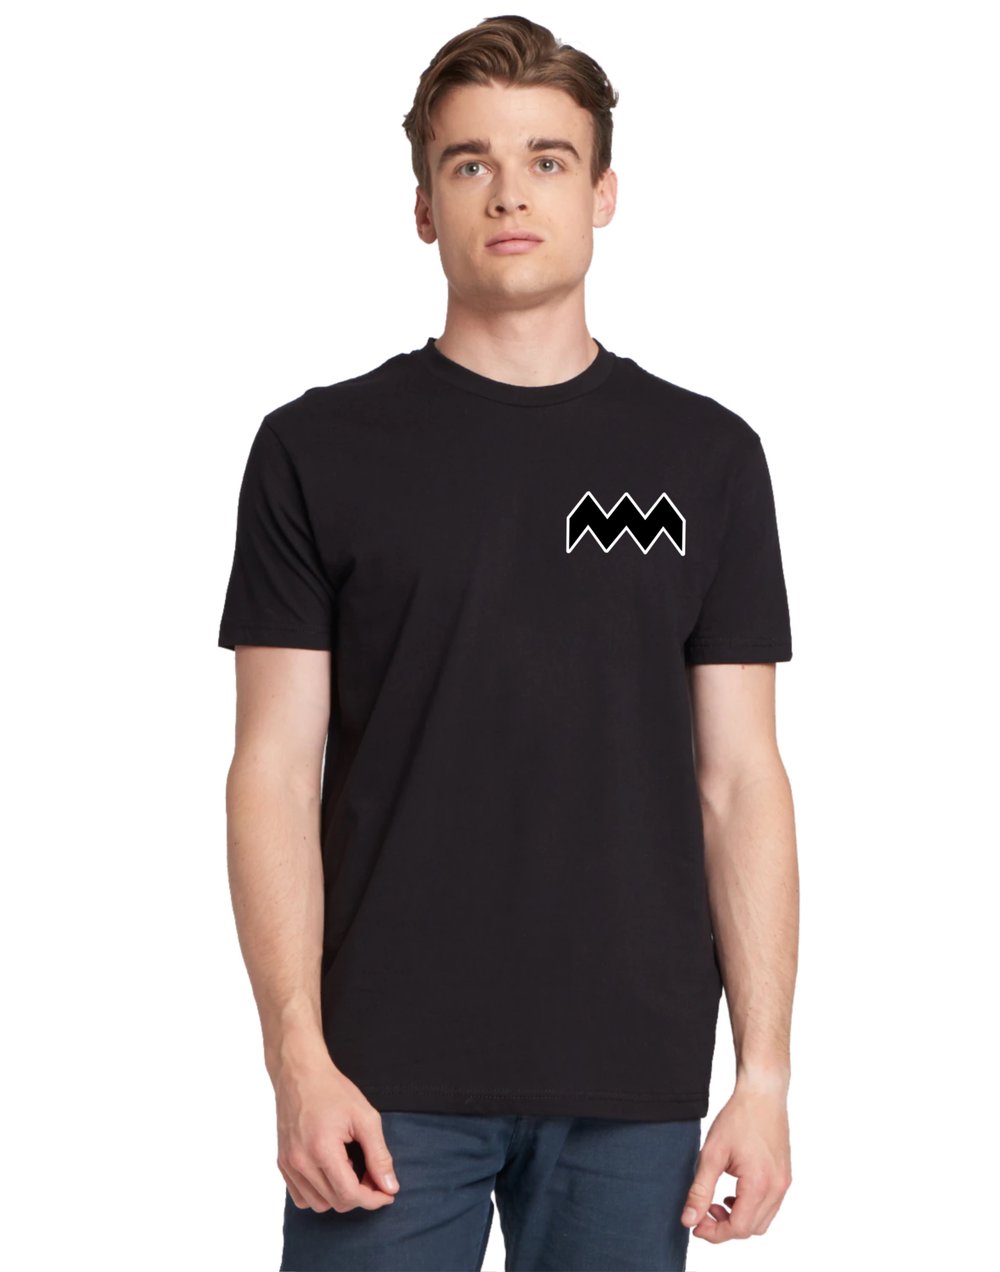 The great omi t-shirt black, only available in Medium